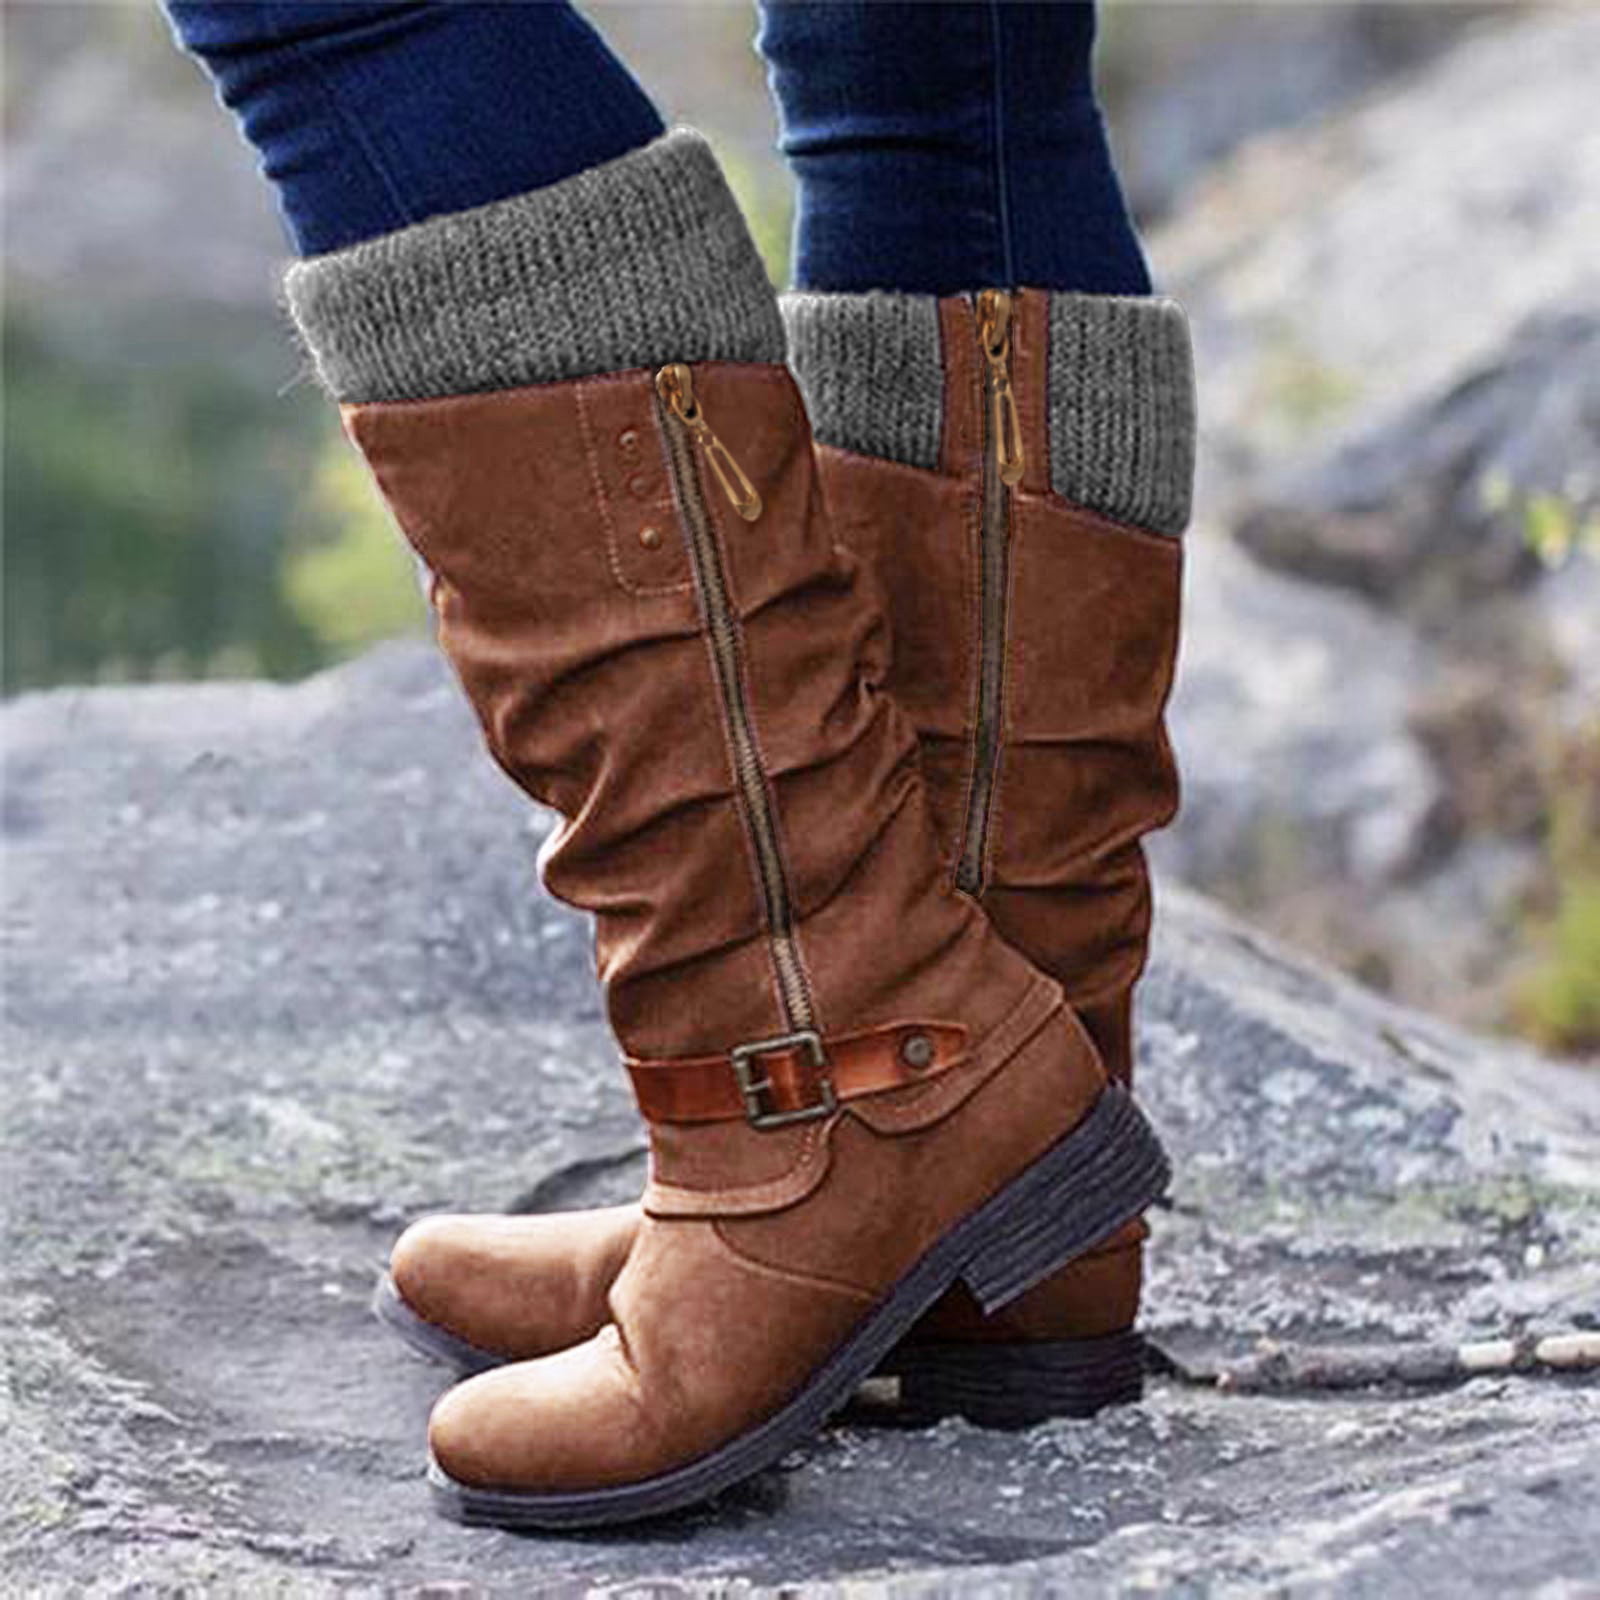 Womens Lace Up Riding Boots Comfy Faux Leather Fashion Patchwork Square Toe Mid-Calf Boot Shoes for Women Medium Chunky Heel Booties Side Zipper 